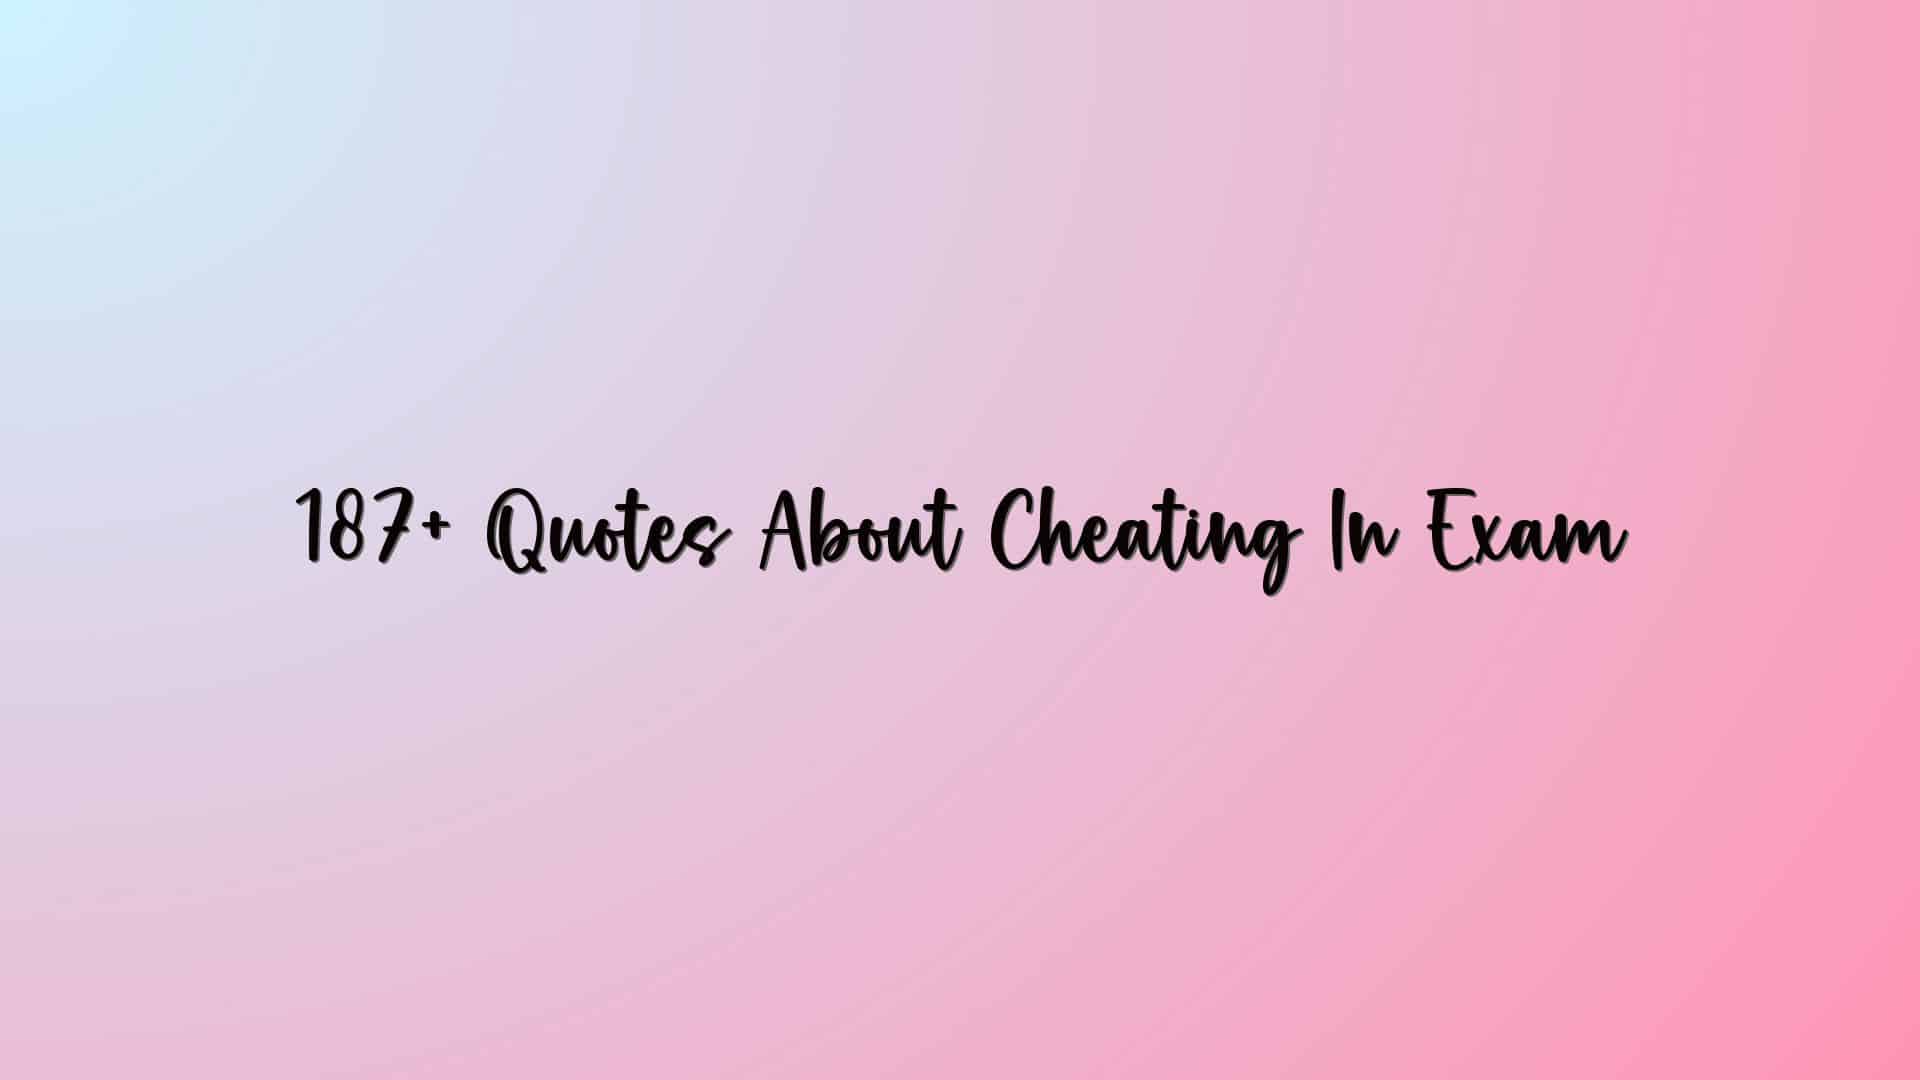 187+ Quotes About Cheating In Exam